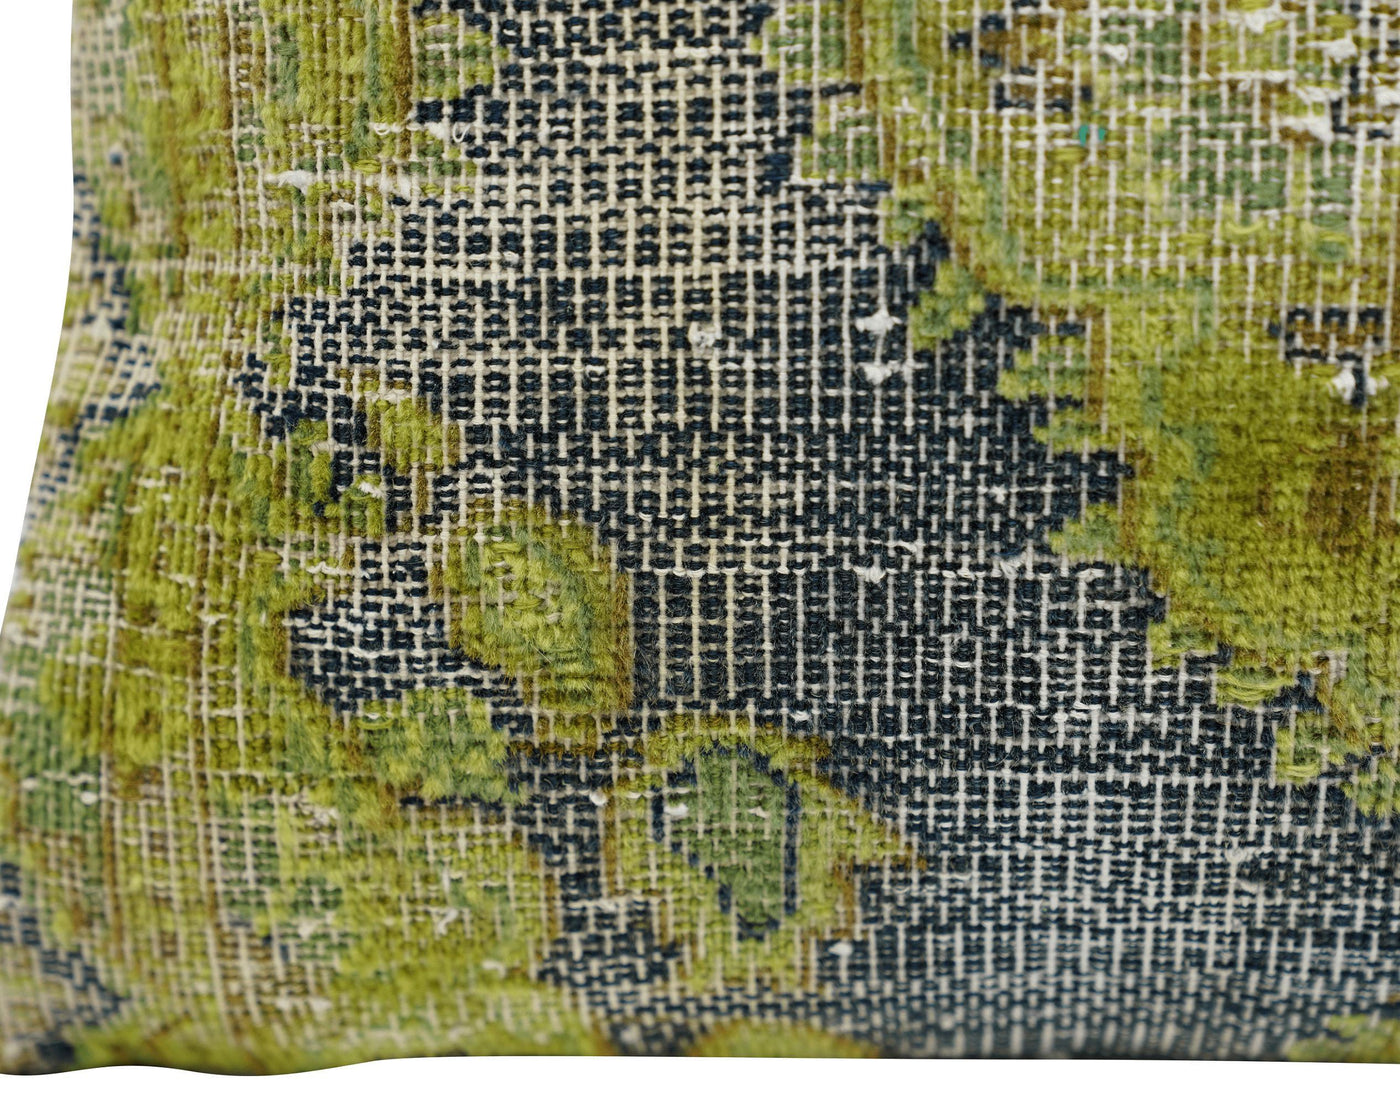 Canvello Antique Olive Green Throw Pillows - 16"x24"